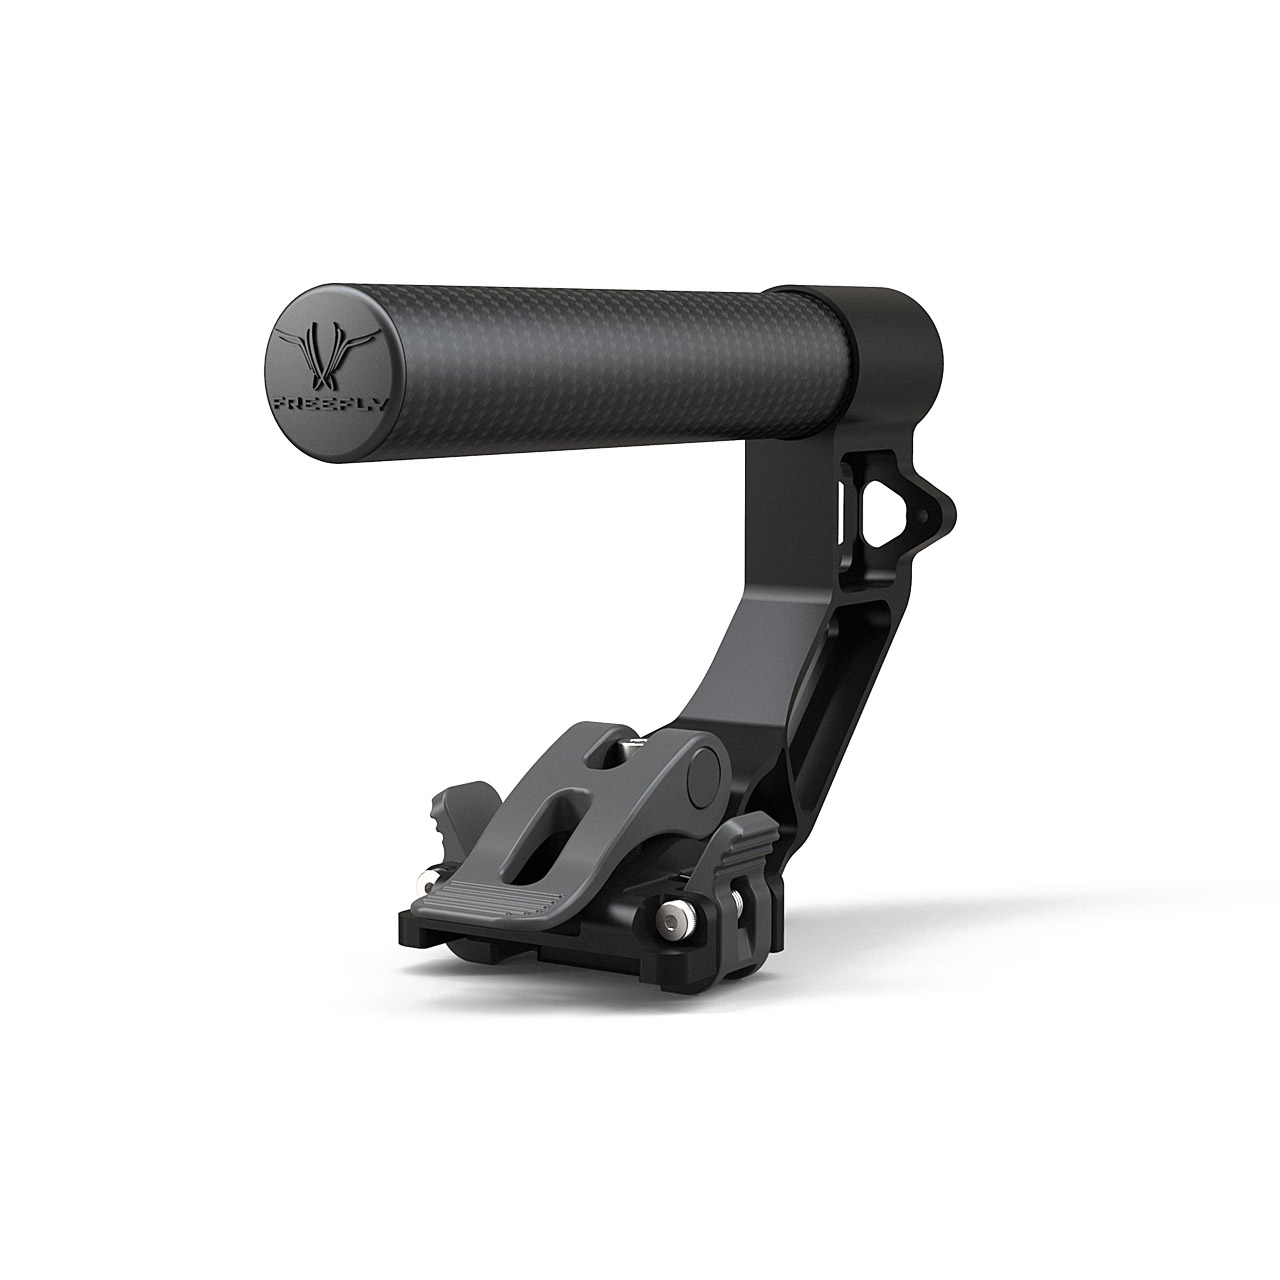 Freefly XL Top Handle, Accessories for gimbals